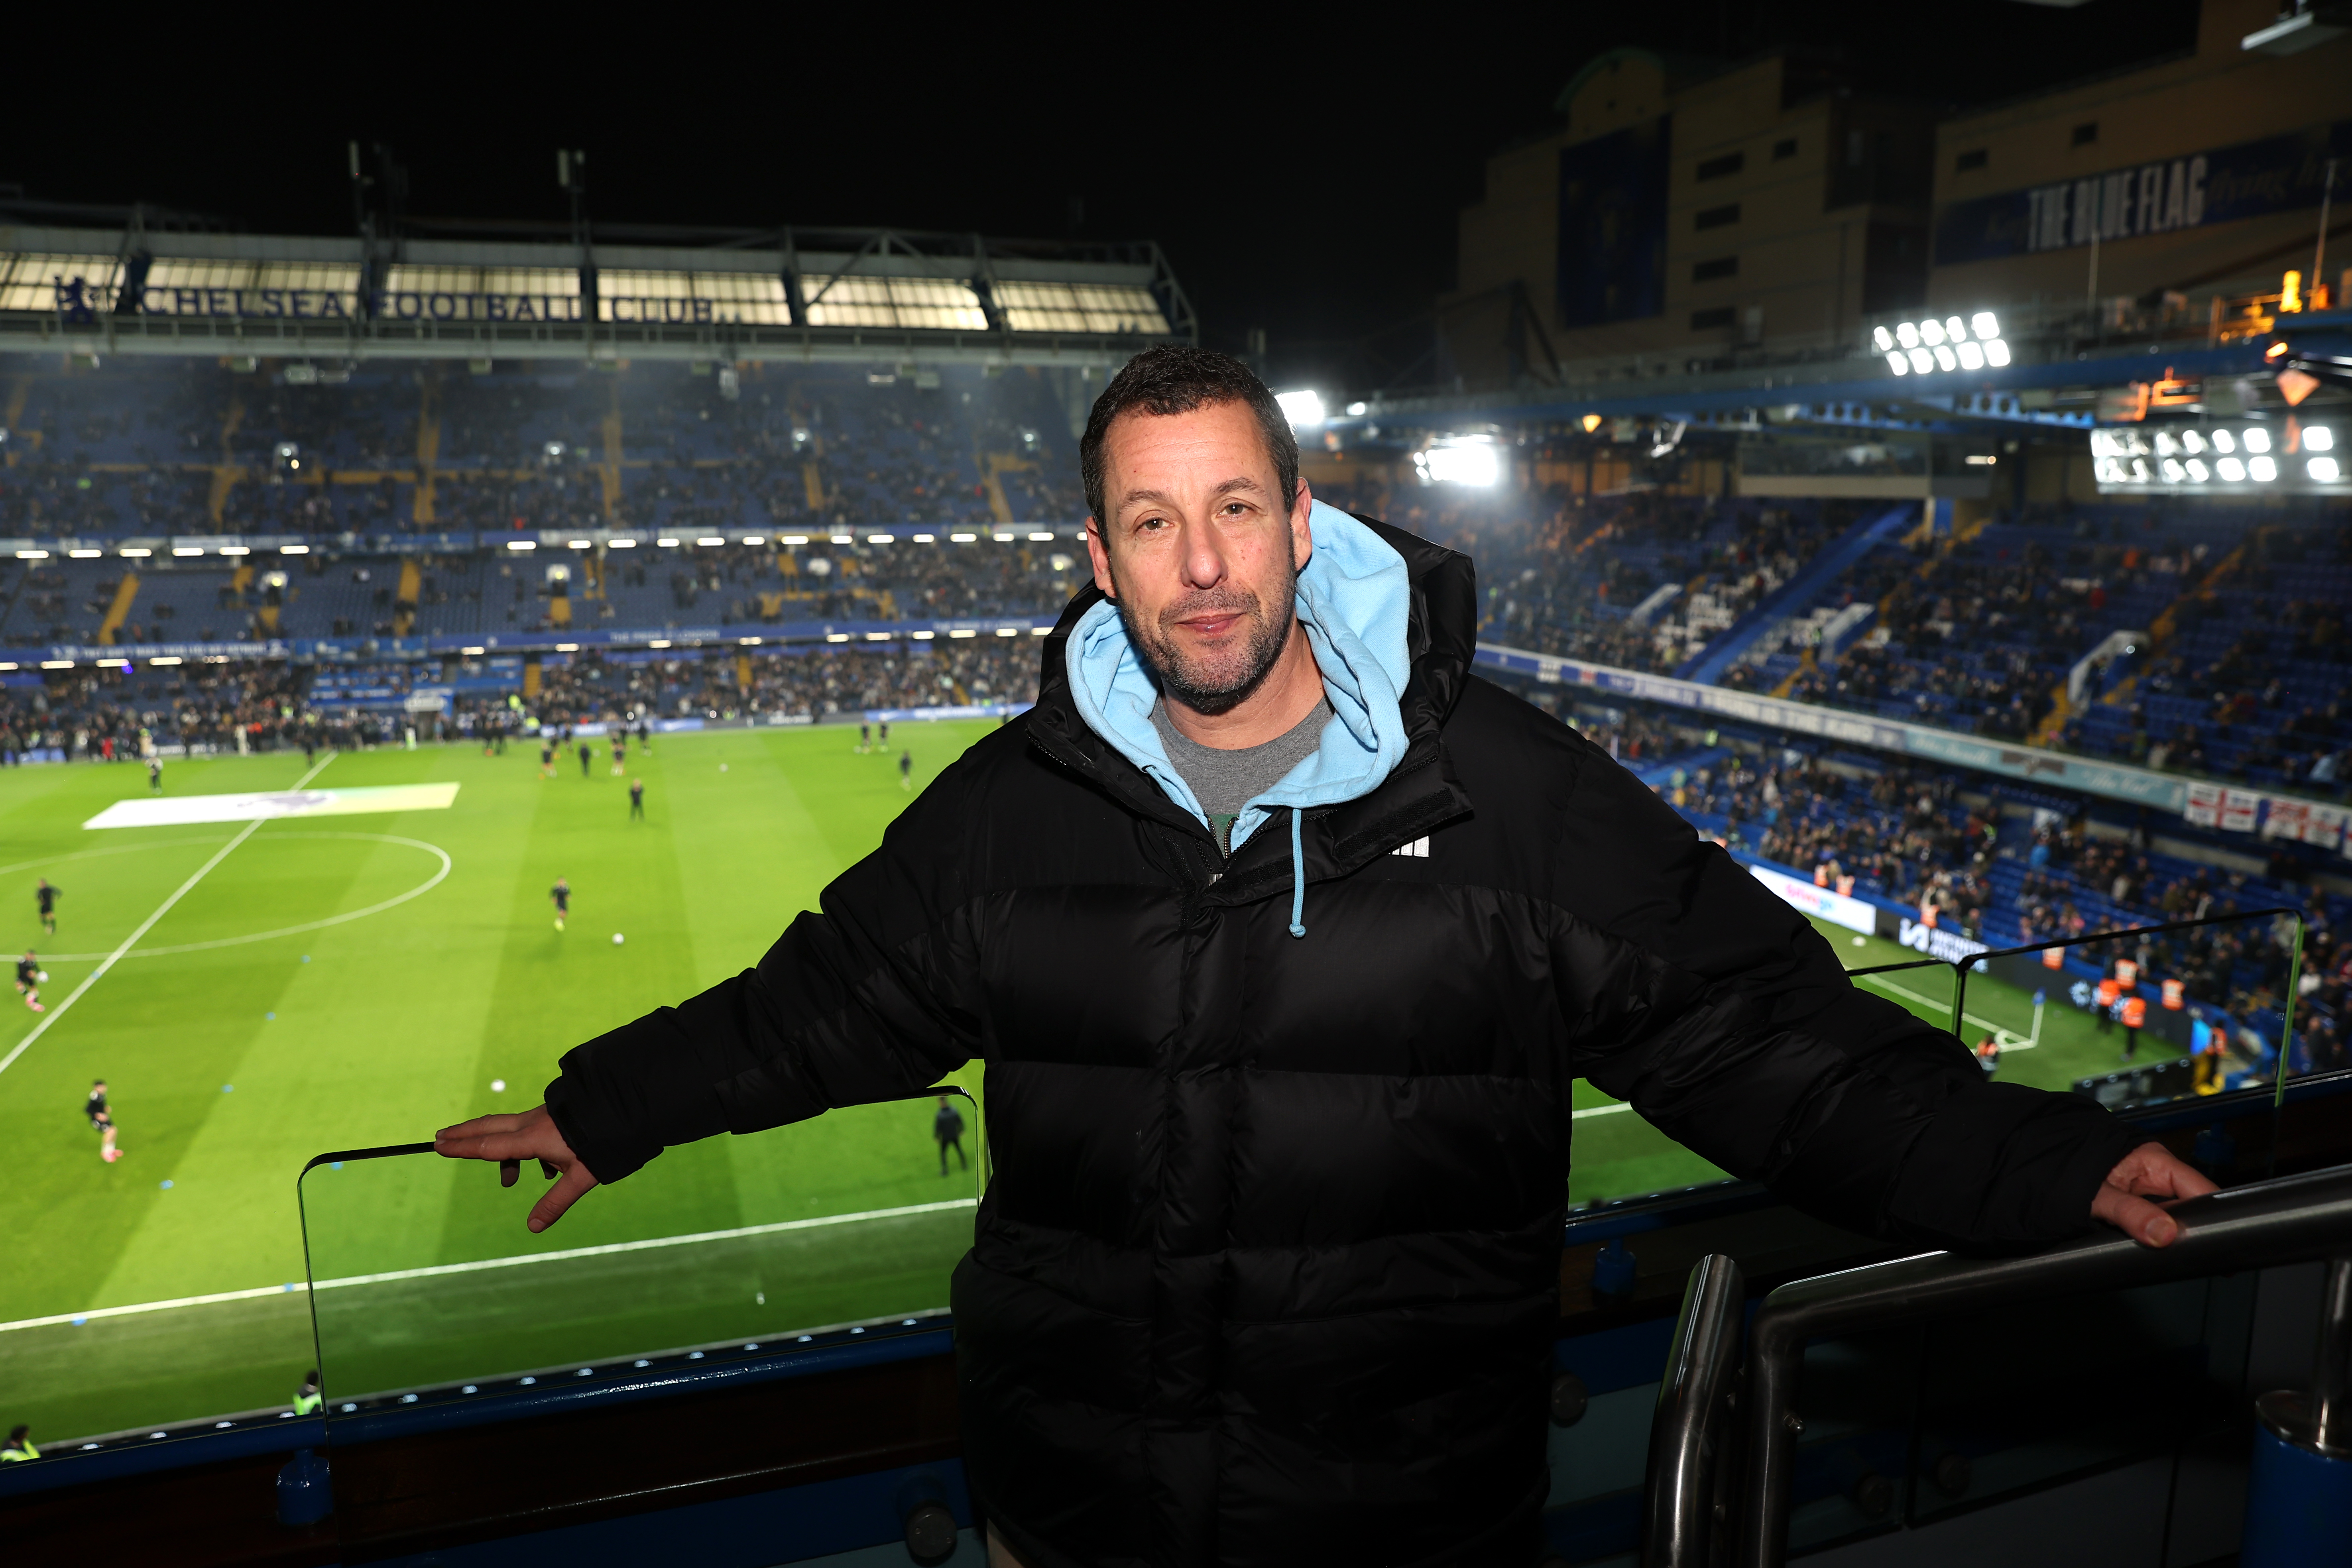 Adam has made sure to make the most of his time in West London by taking in a Chelsea game